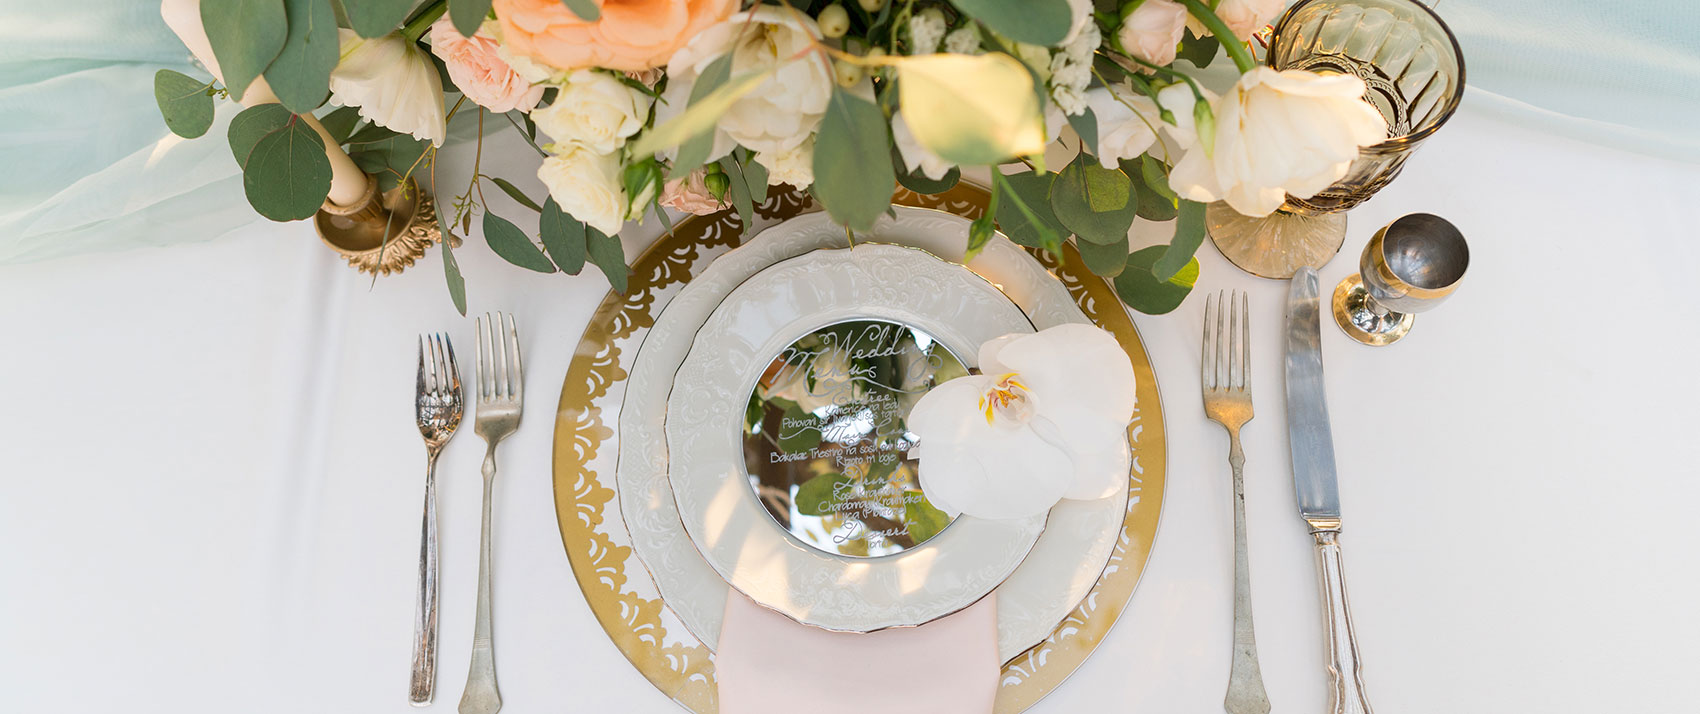 table set with wedding flowers and champagne glasses - portland wedding venues